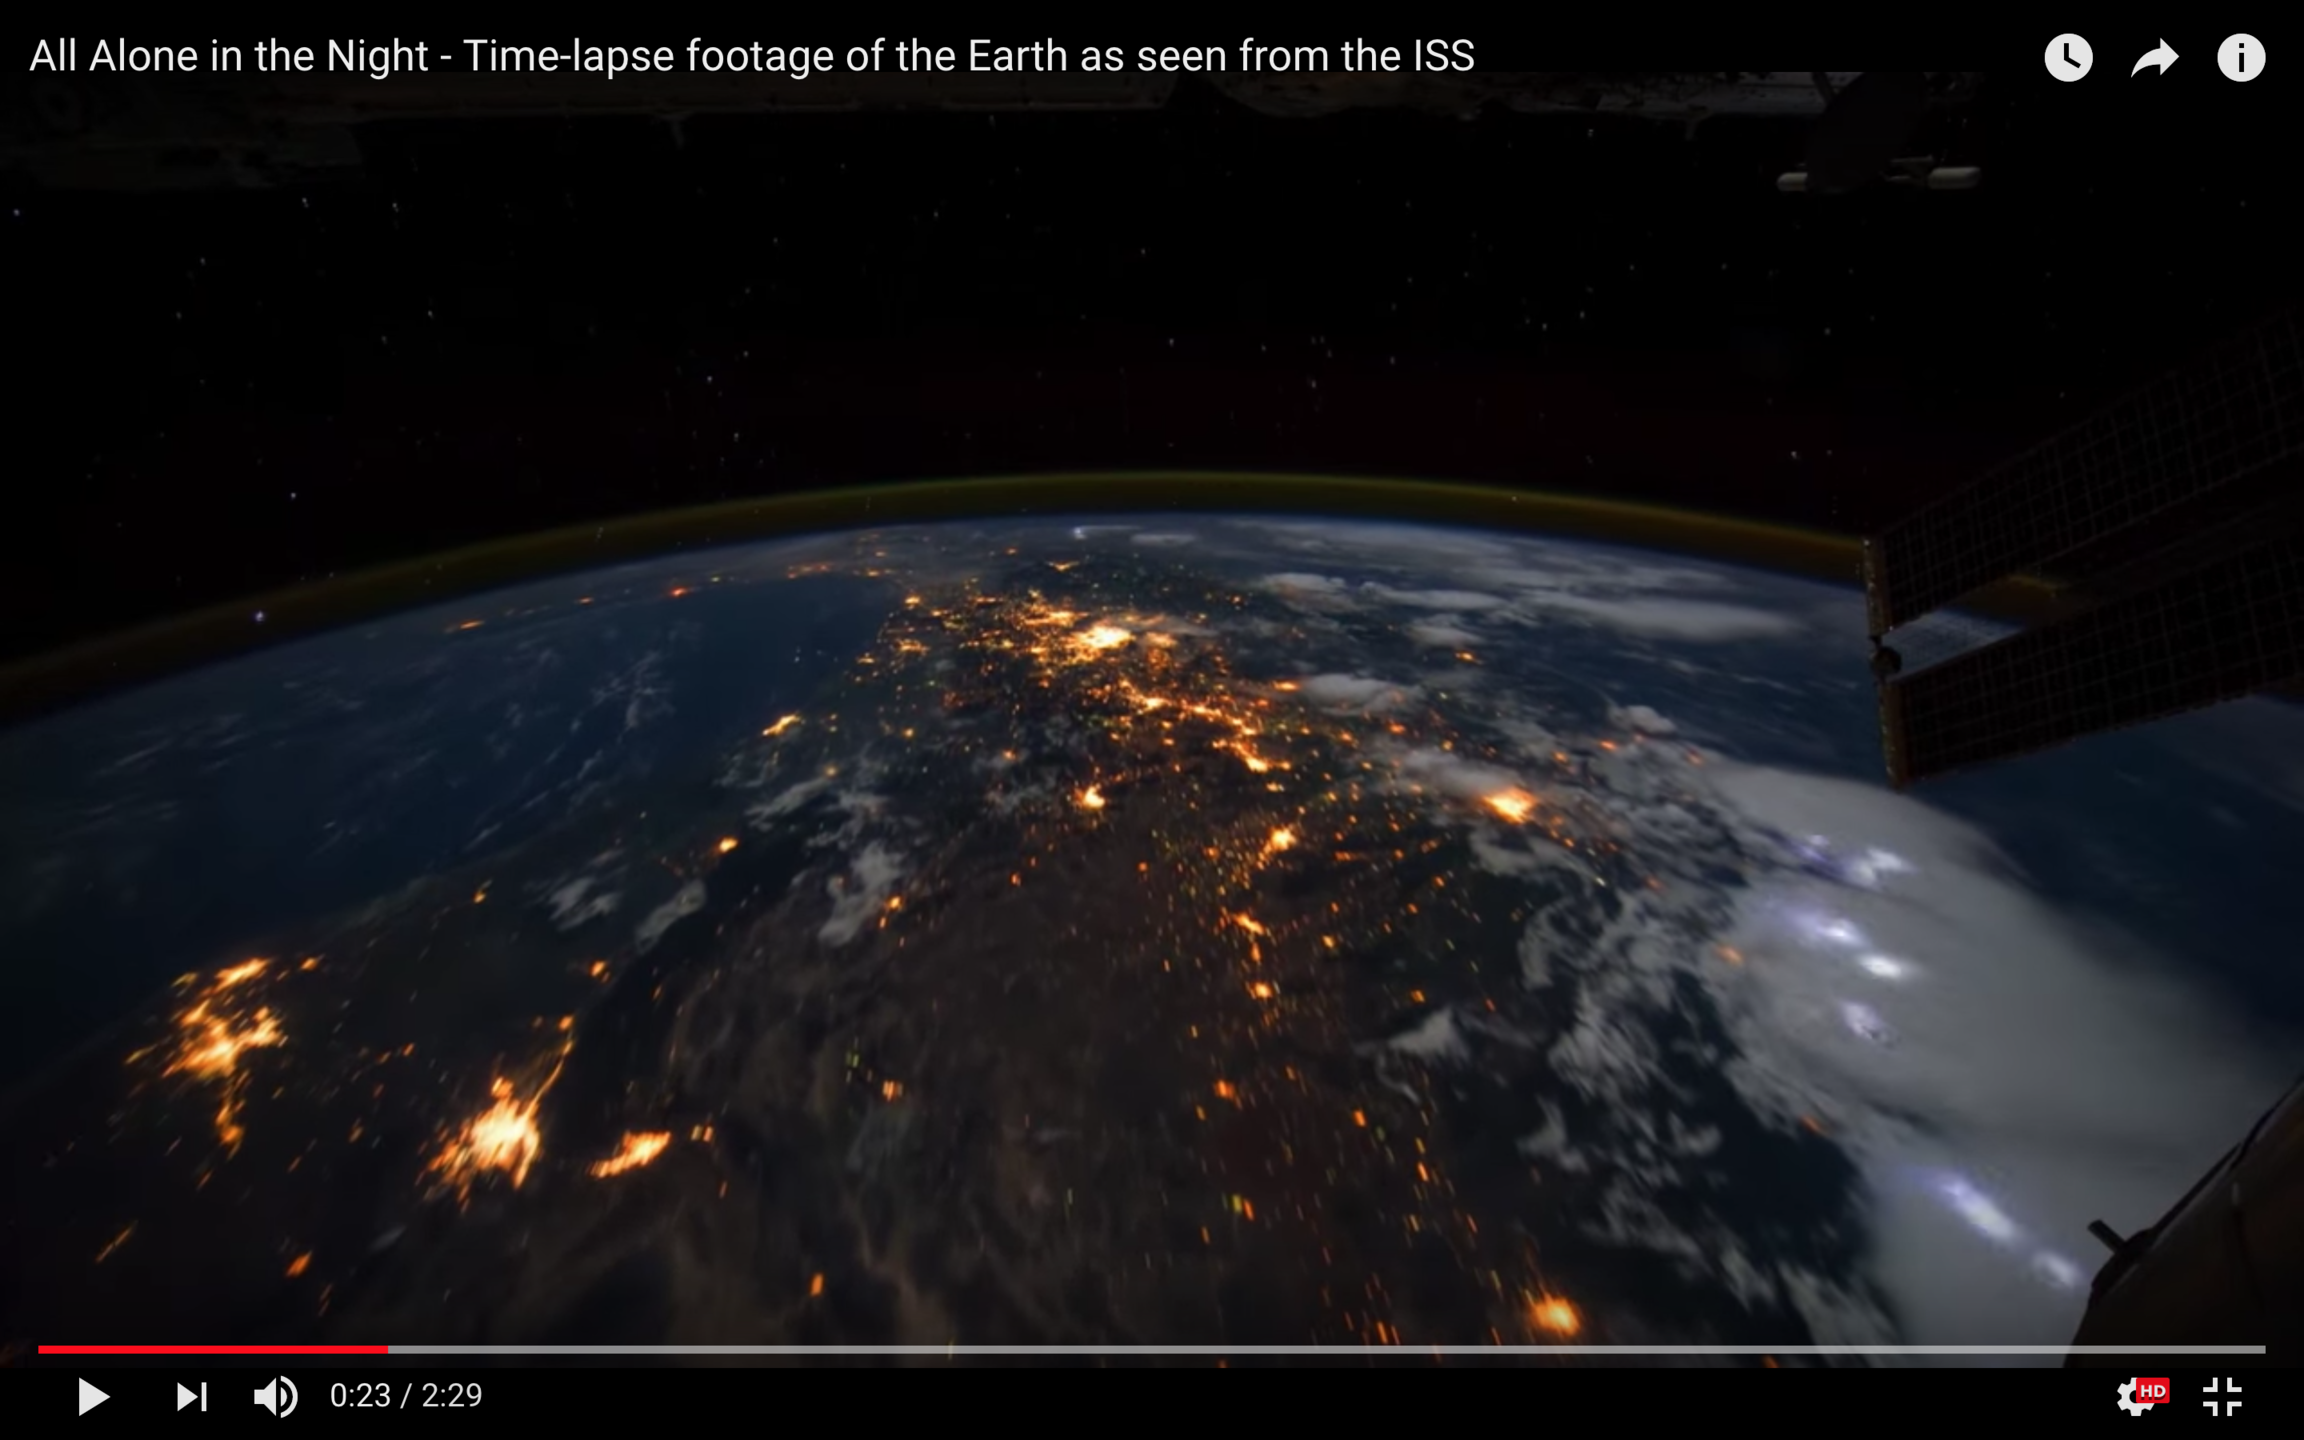 ISS Time-lapse